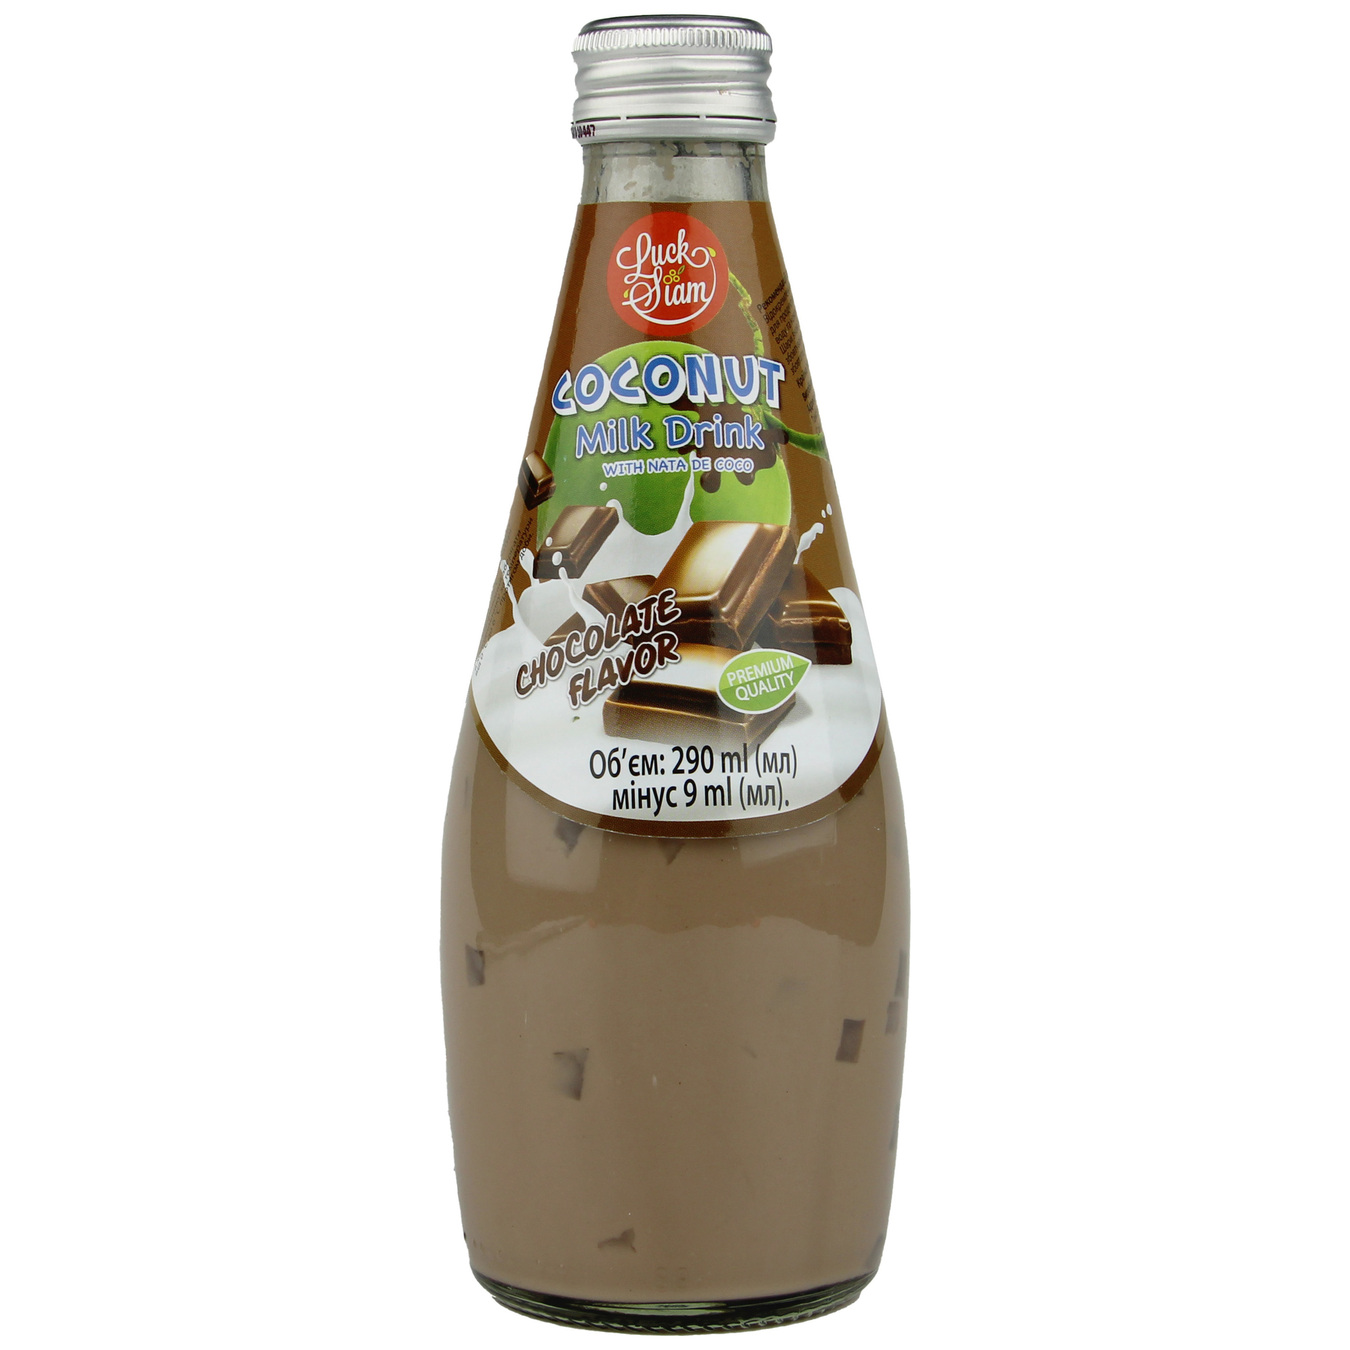 Luck Siam with chocolate flavored coconut milk drink 290ml